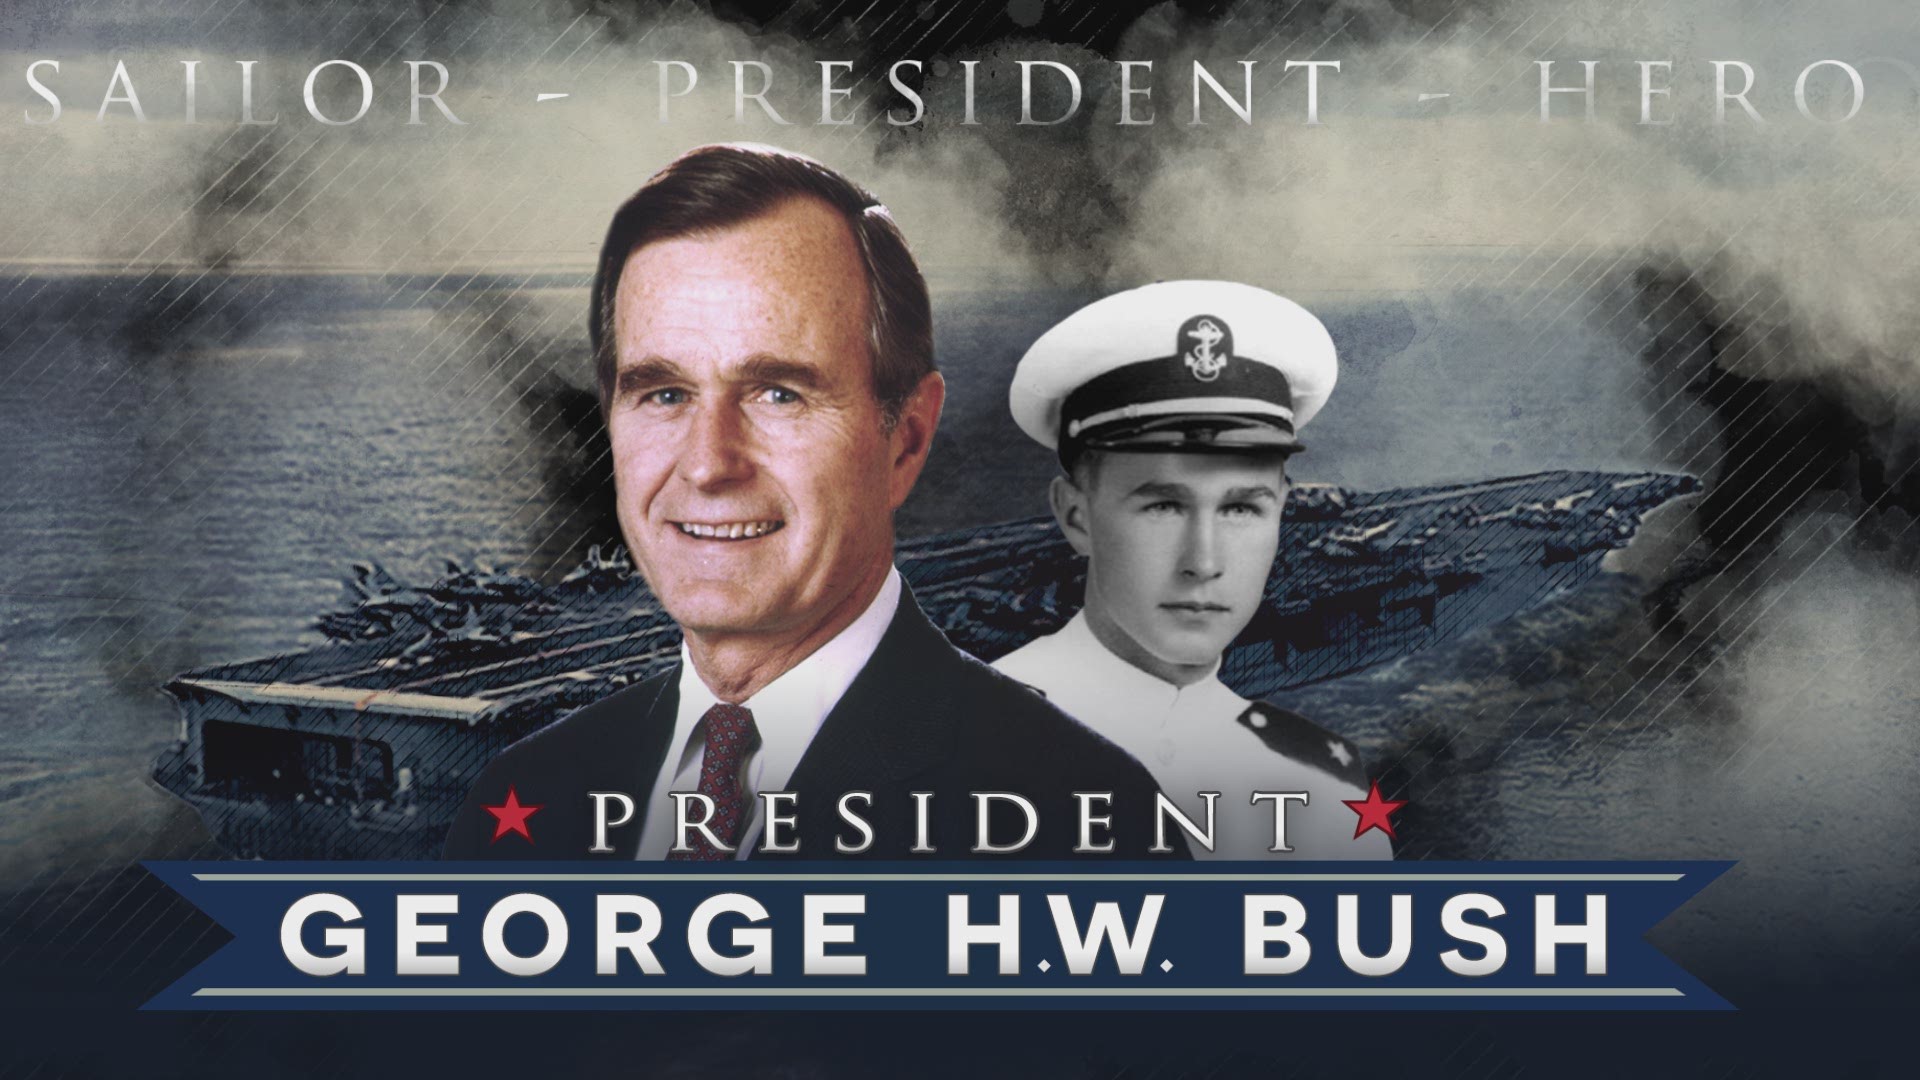 Bush enlisted in the US Naval Reserve June 13, 1942, on his 18th birthday after the attack on Pearl Harbor in December 1941. He had preflight training at the University of North Carolina at Chapel Hill and became one of the youngest naval aviators. VIDEO